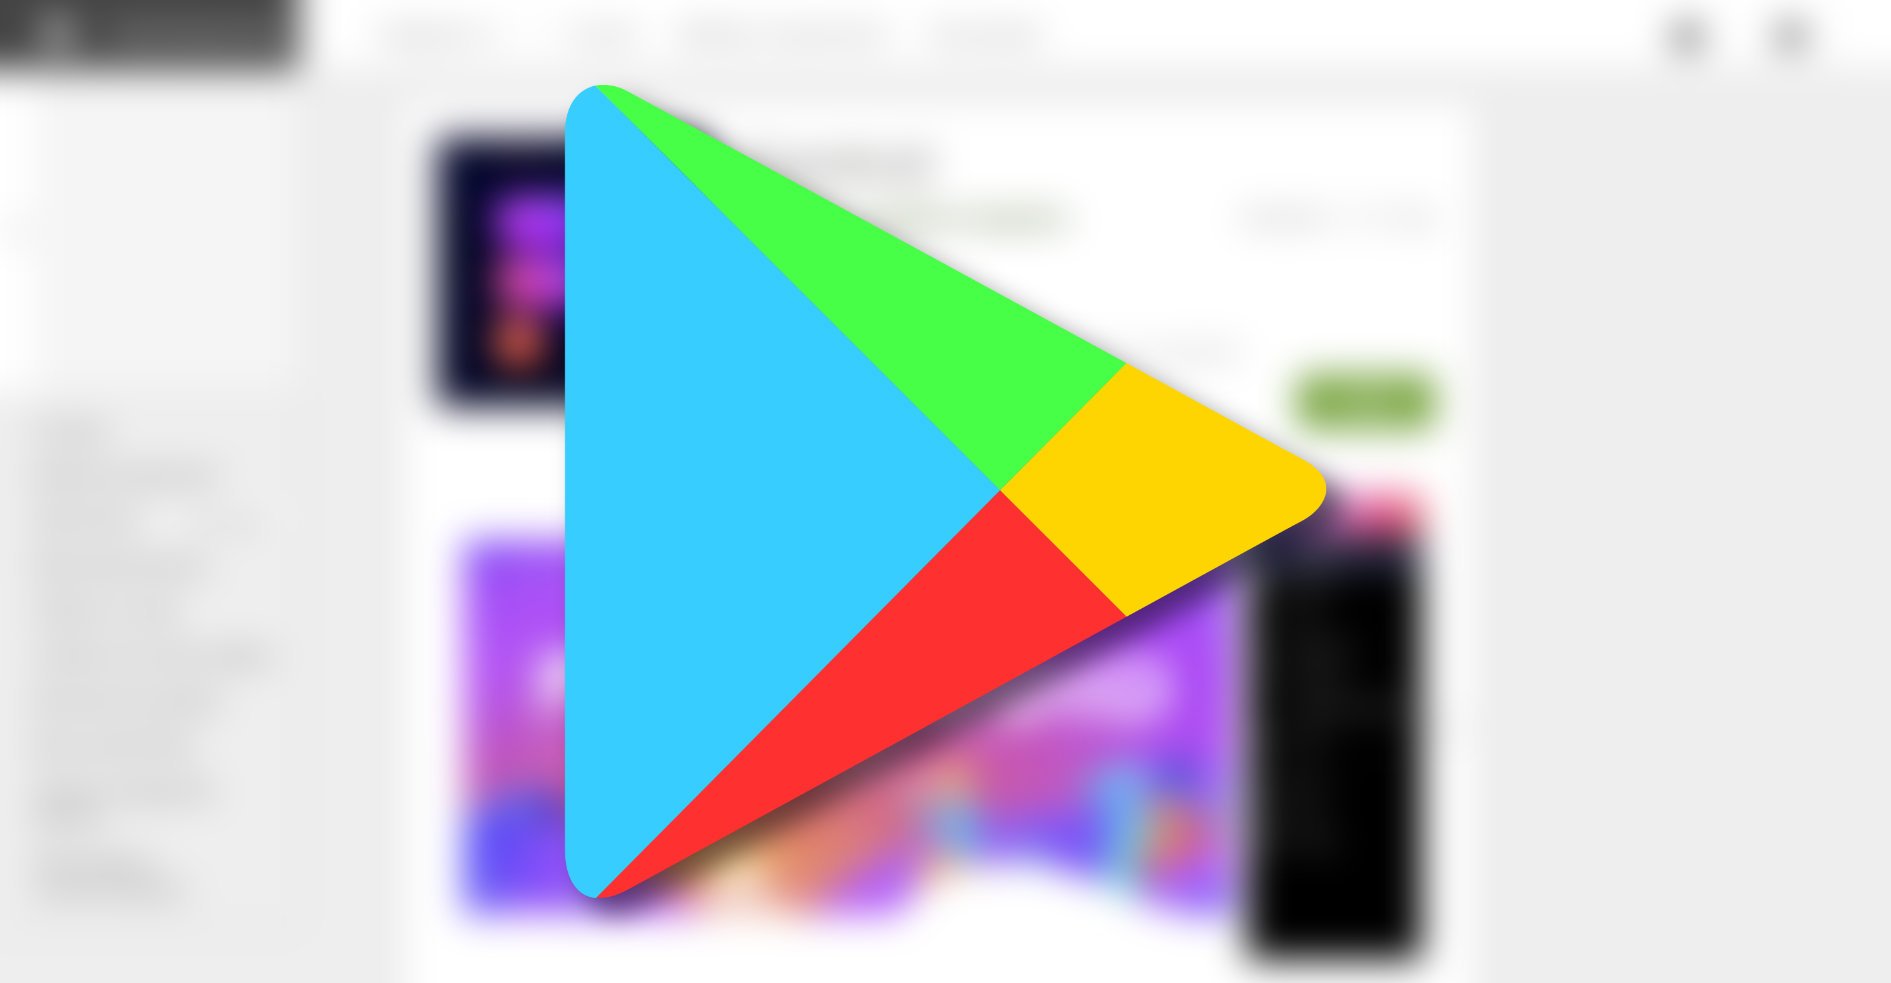 Finally, the new Google Play Store web version looks like a mobile app

